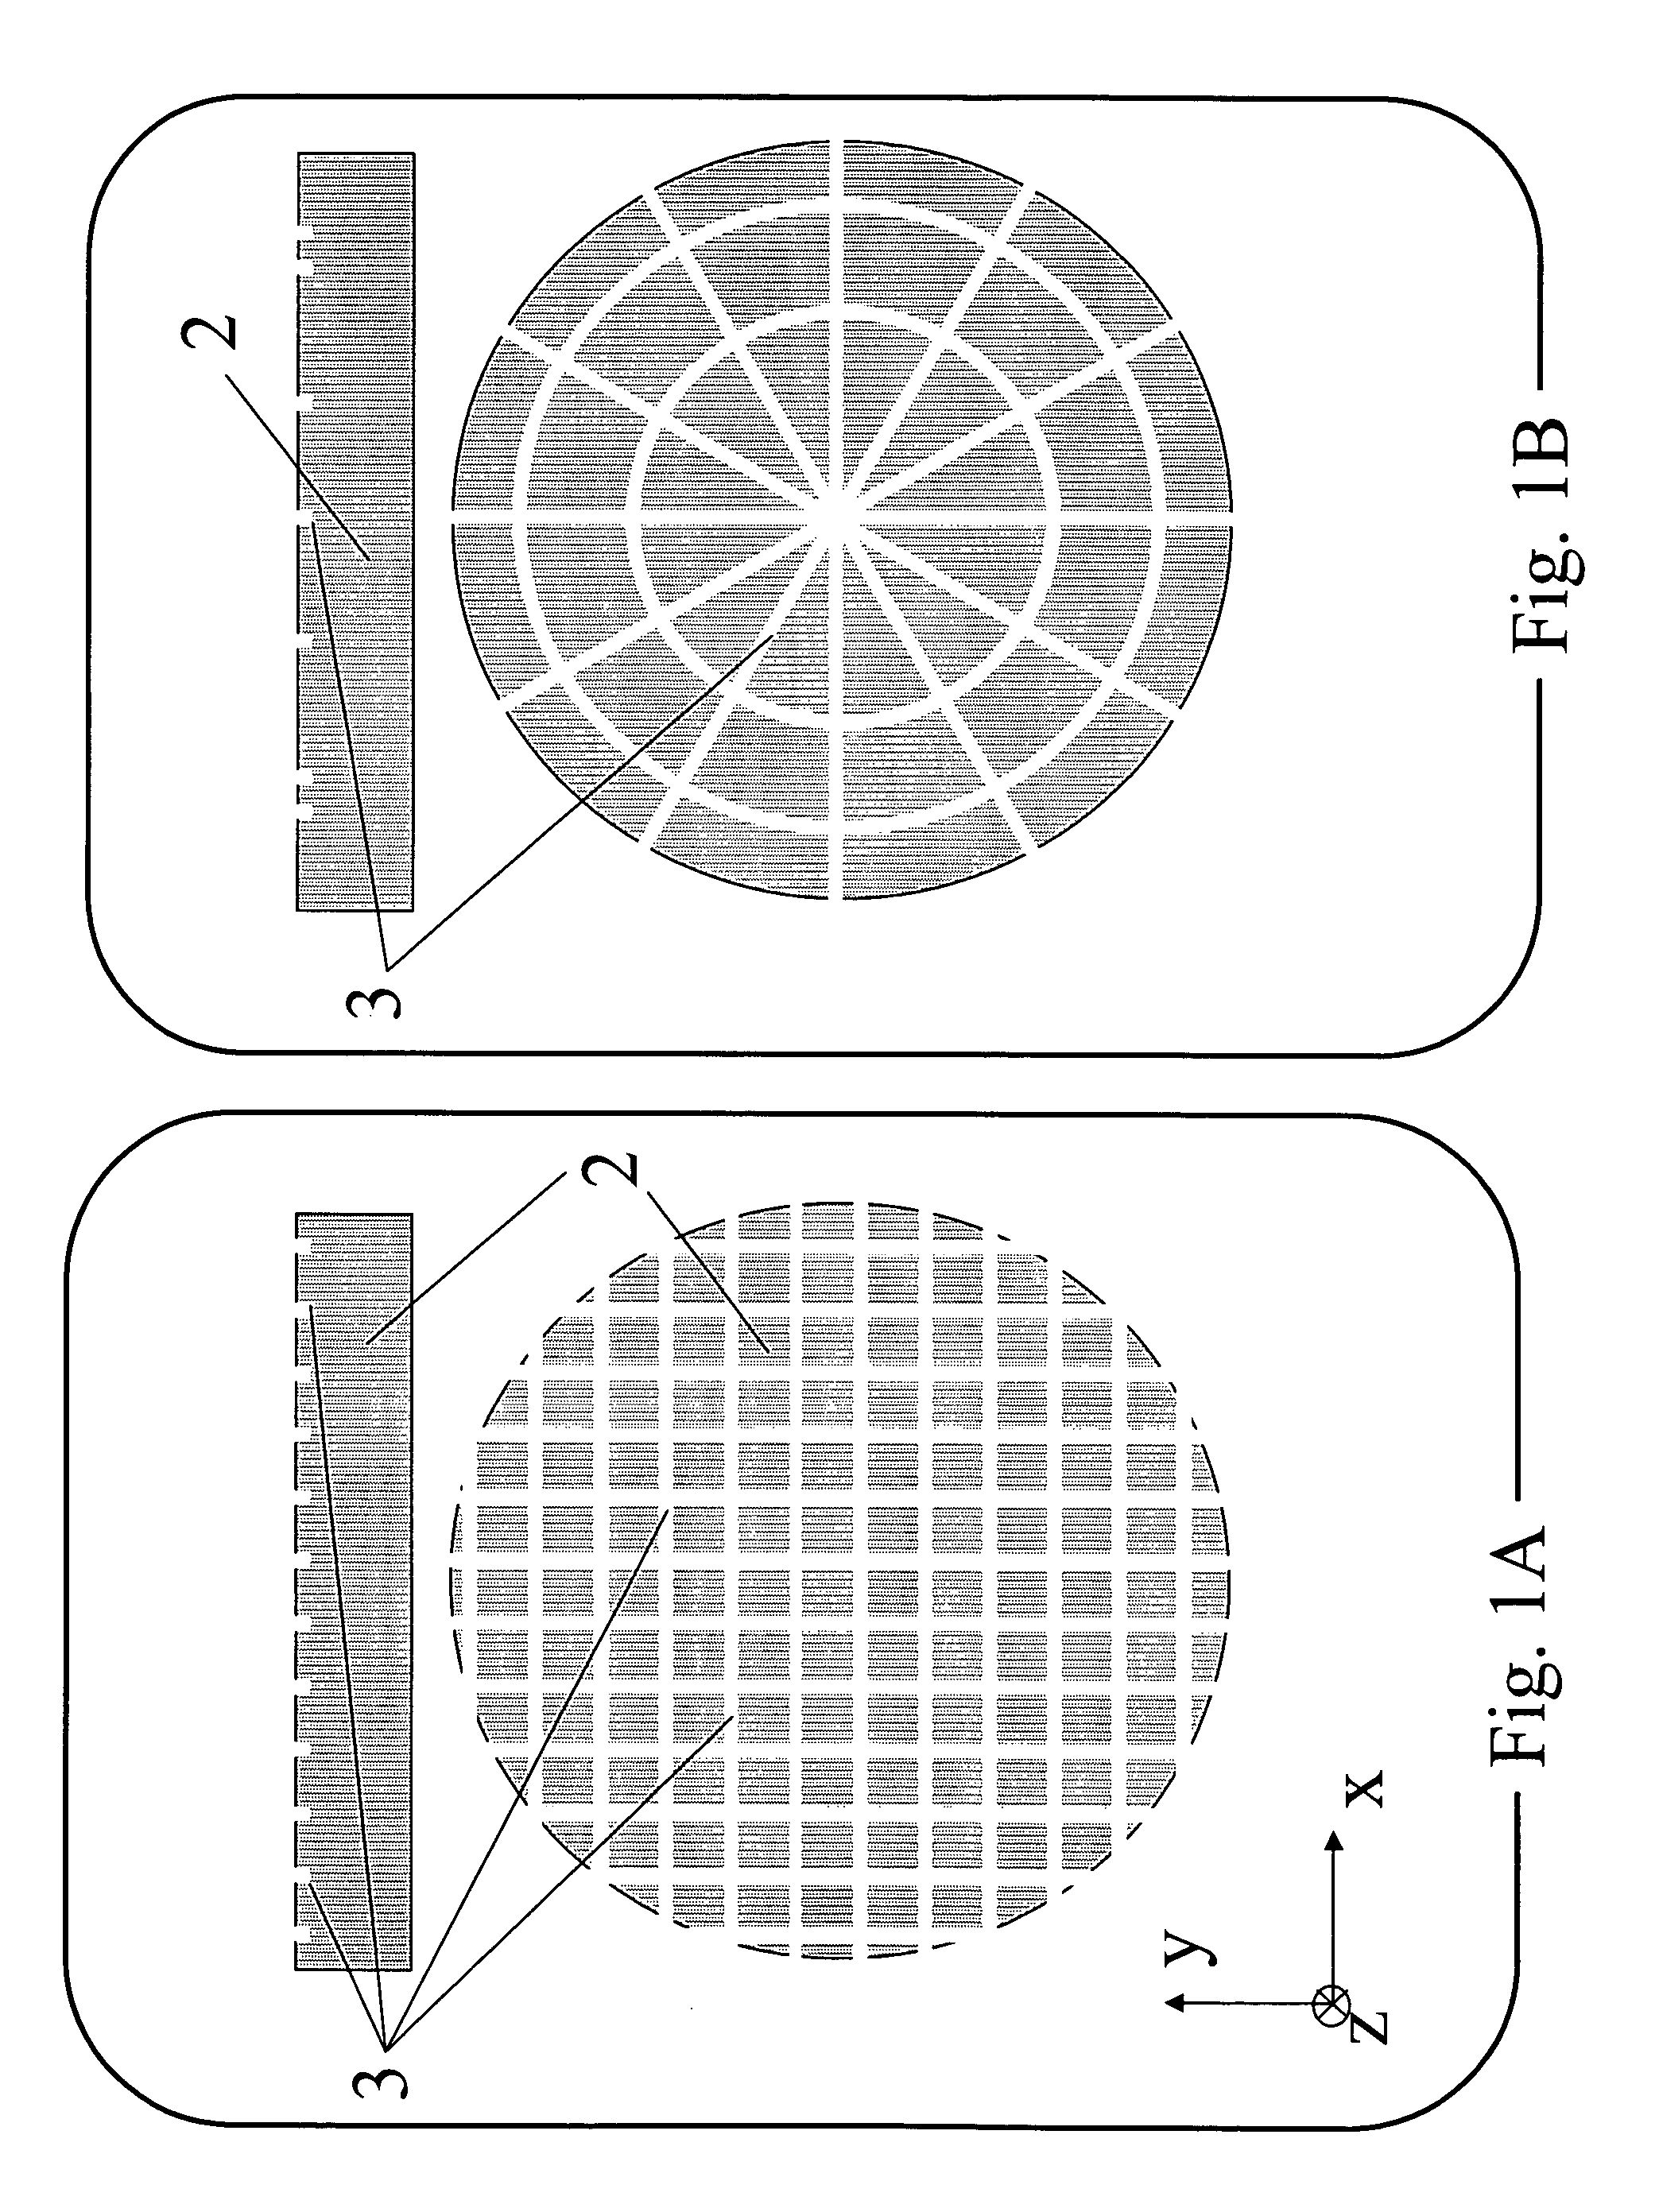 Method for the manufacture of electronic devices on substrates and devices related thereto